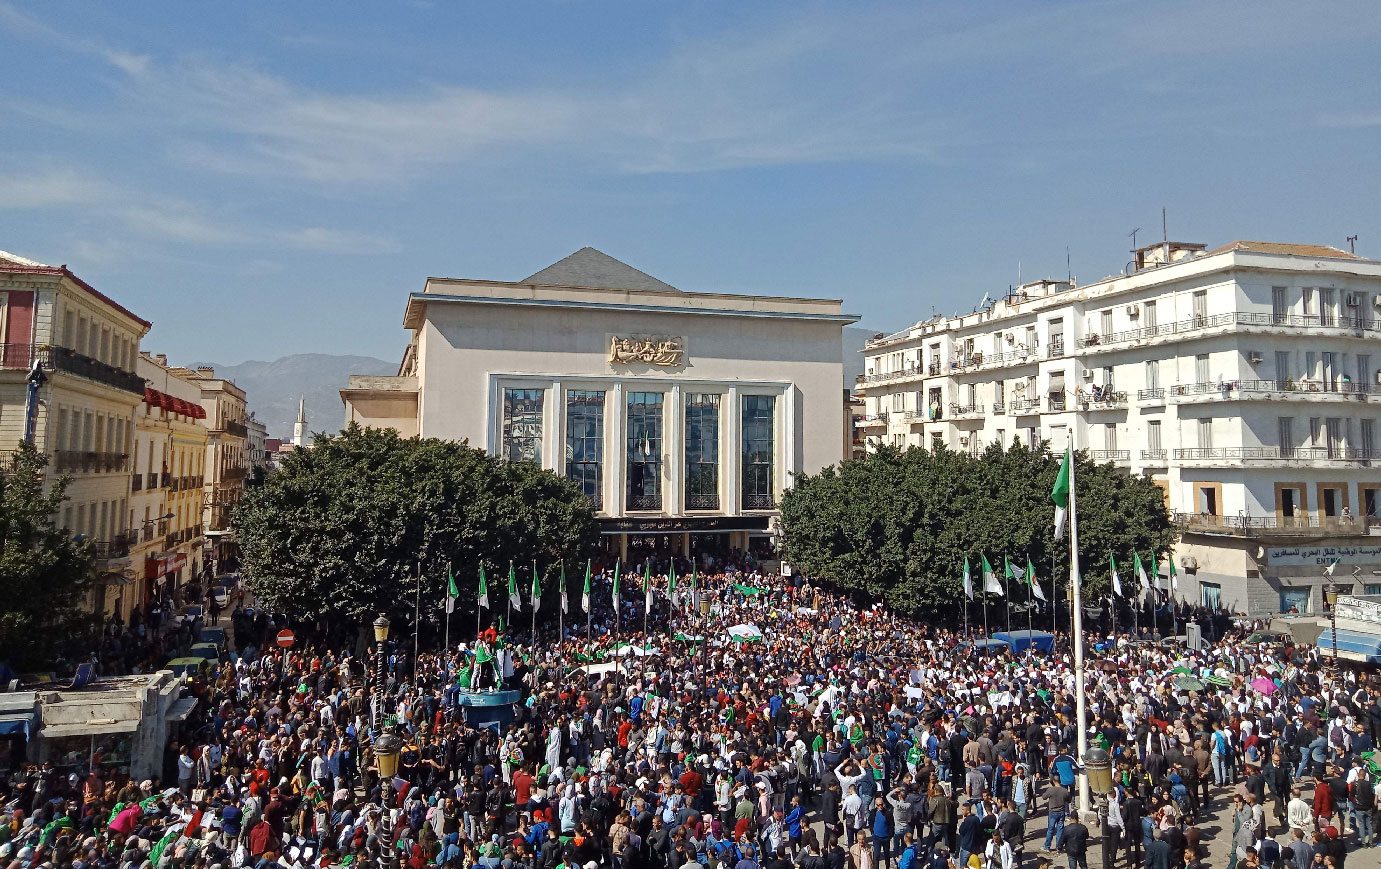 Algerians participate in a protest rally against their ailing president's bid for a fifth term in power, in the northeastern city of Annaba on March 5, 2019.